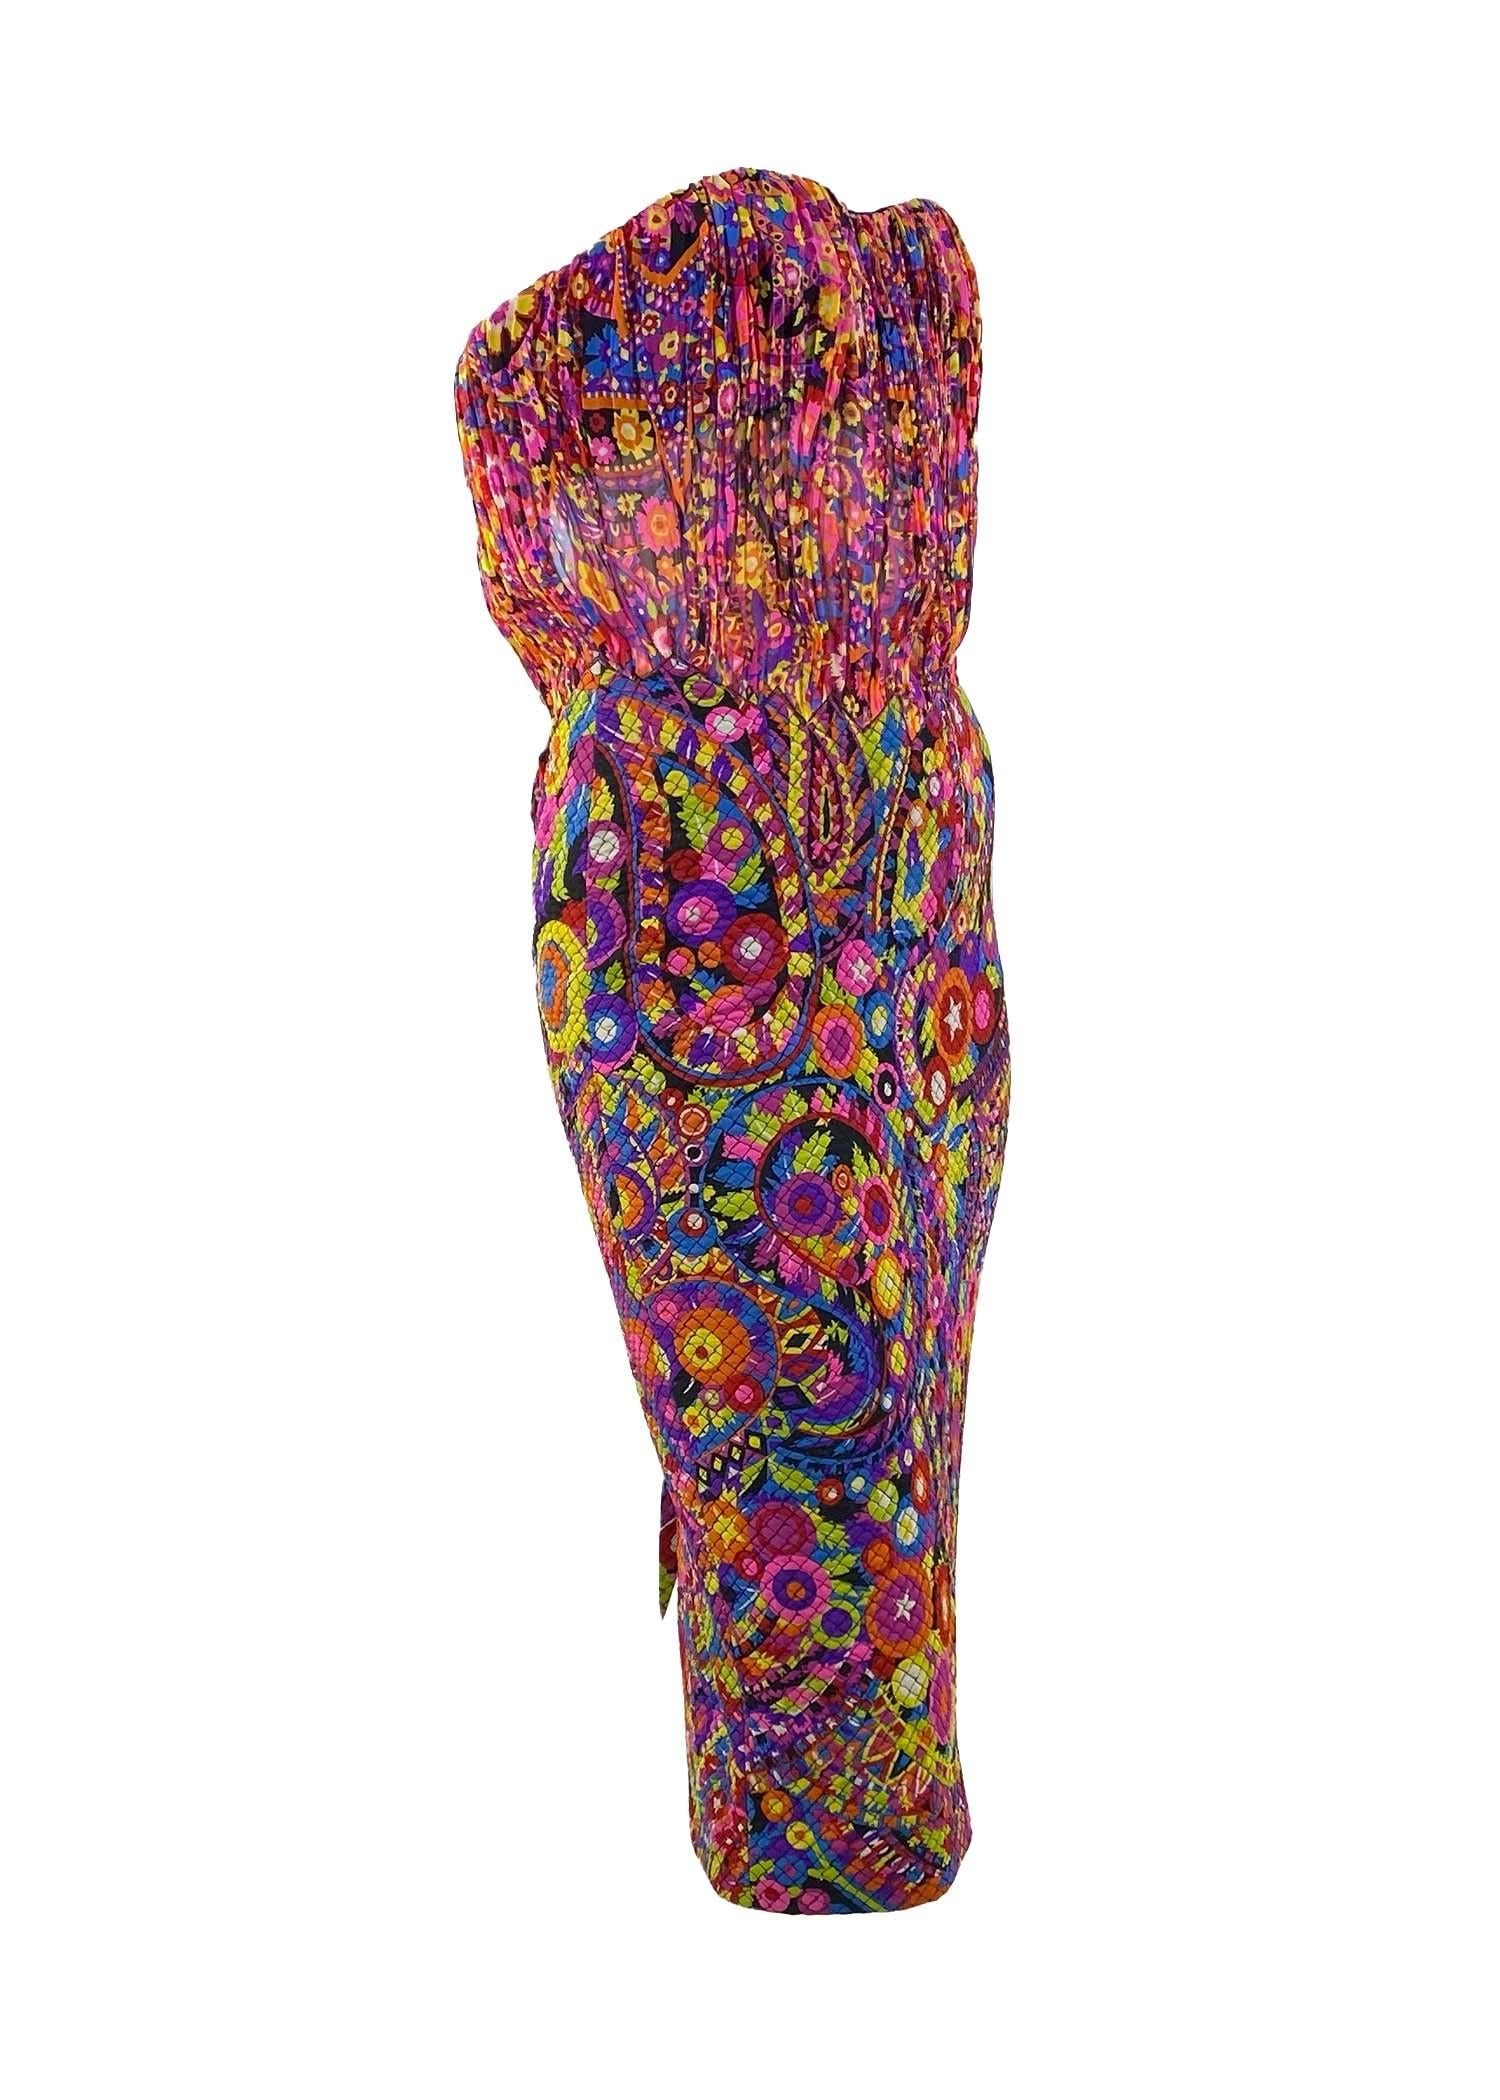 Women's F/W 2002 Gianni Versace by Donatella Psychedelic Print Sheer Strapless Dress For Sale